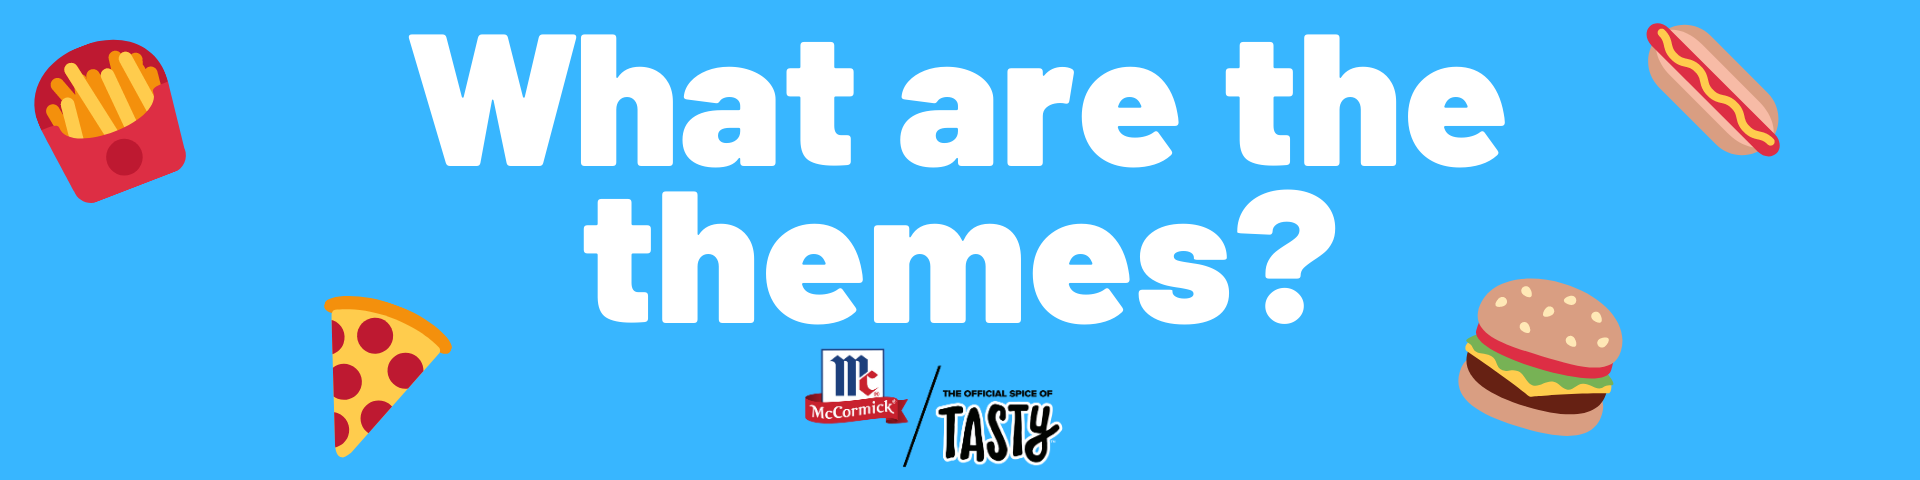 what are the themes?